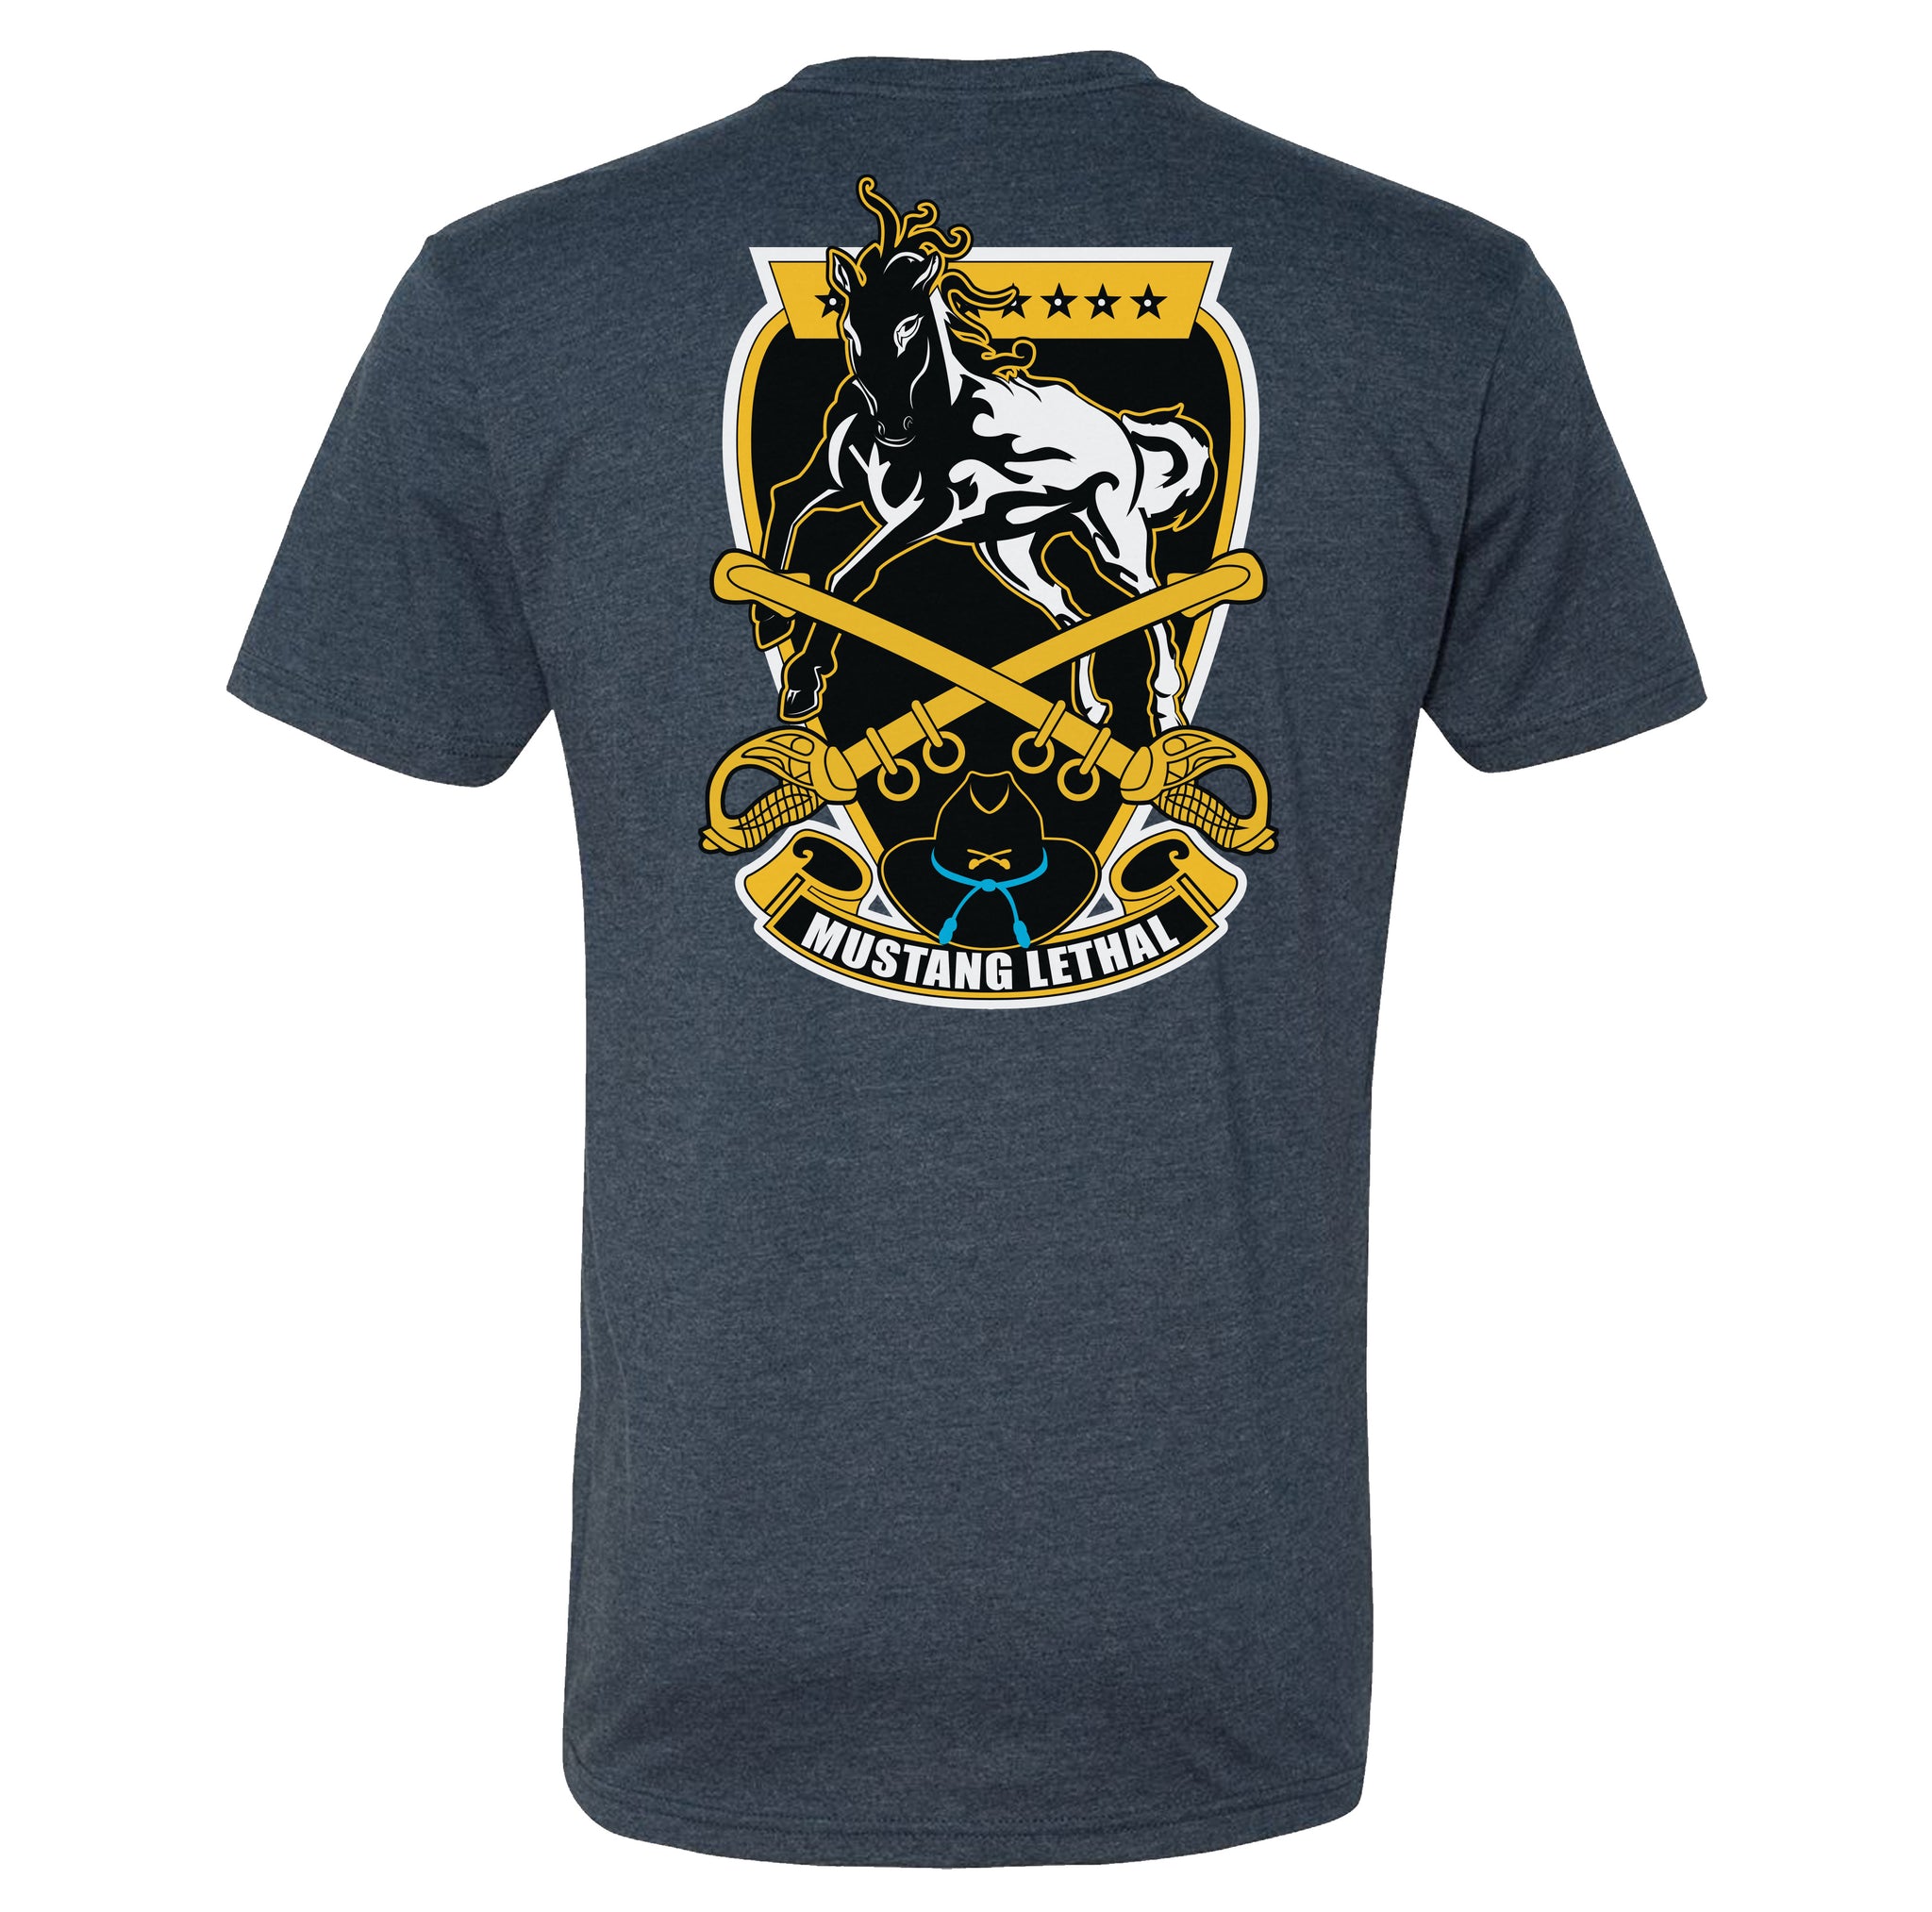 Mustang Lethal Tee